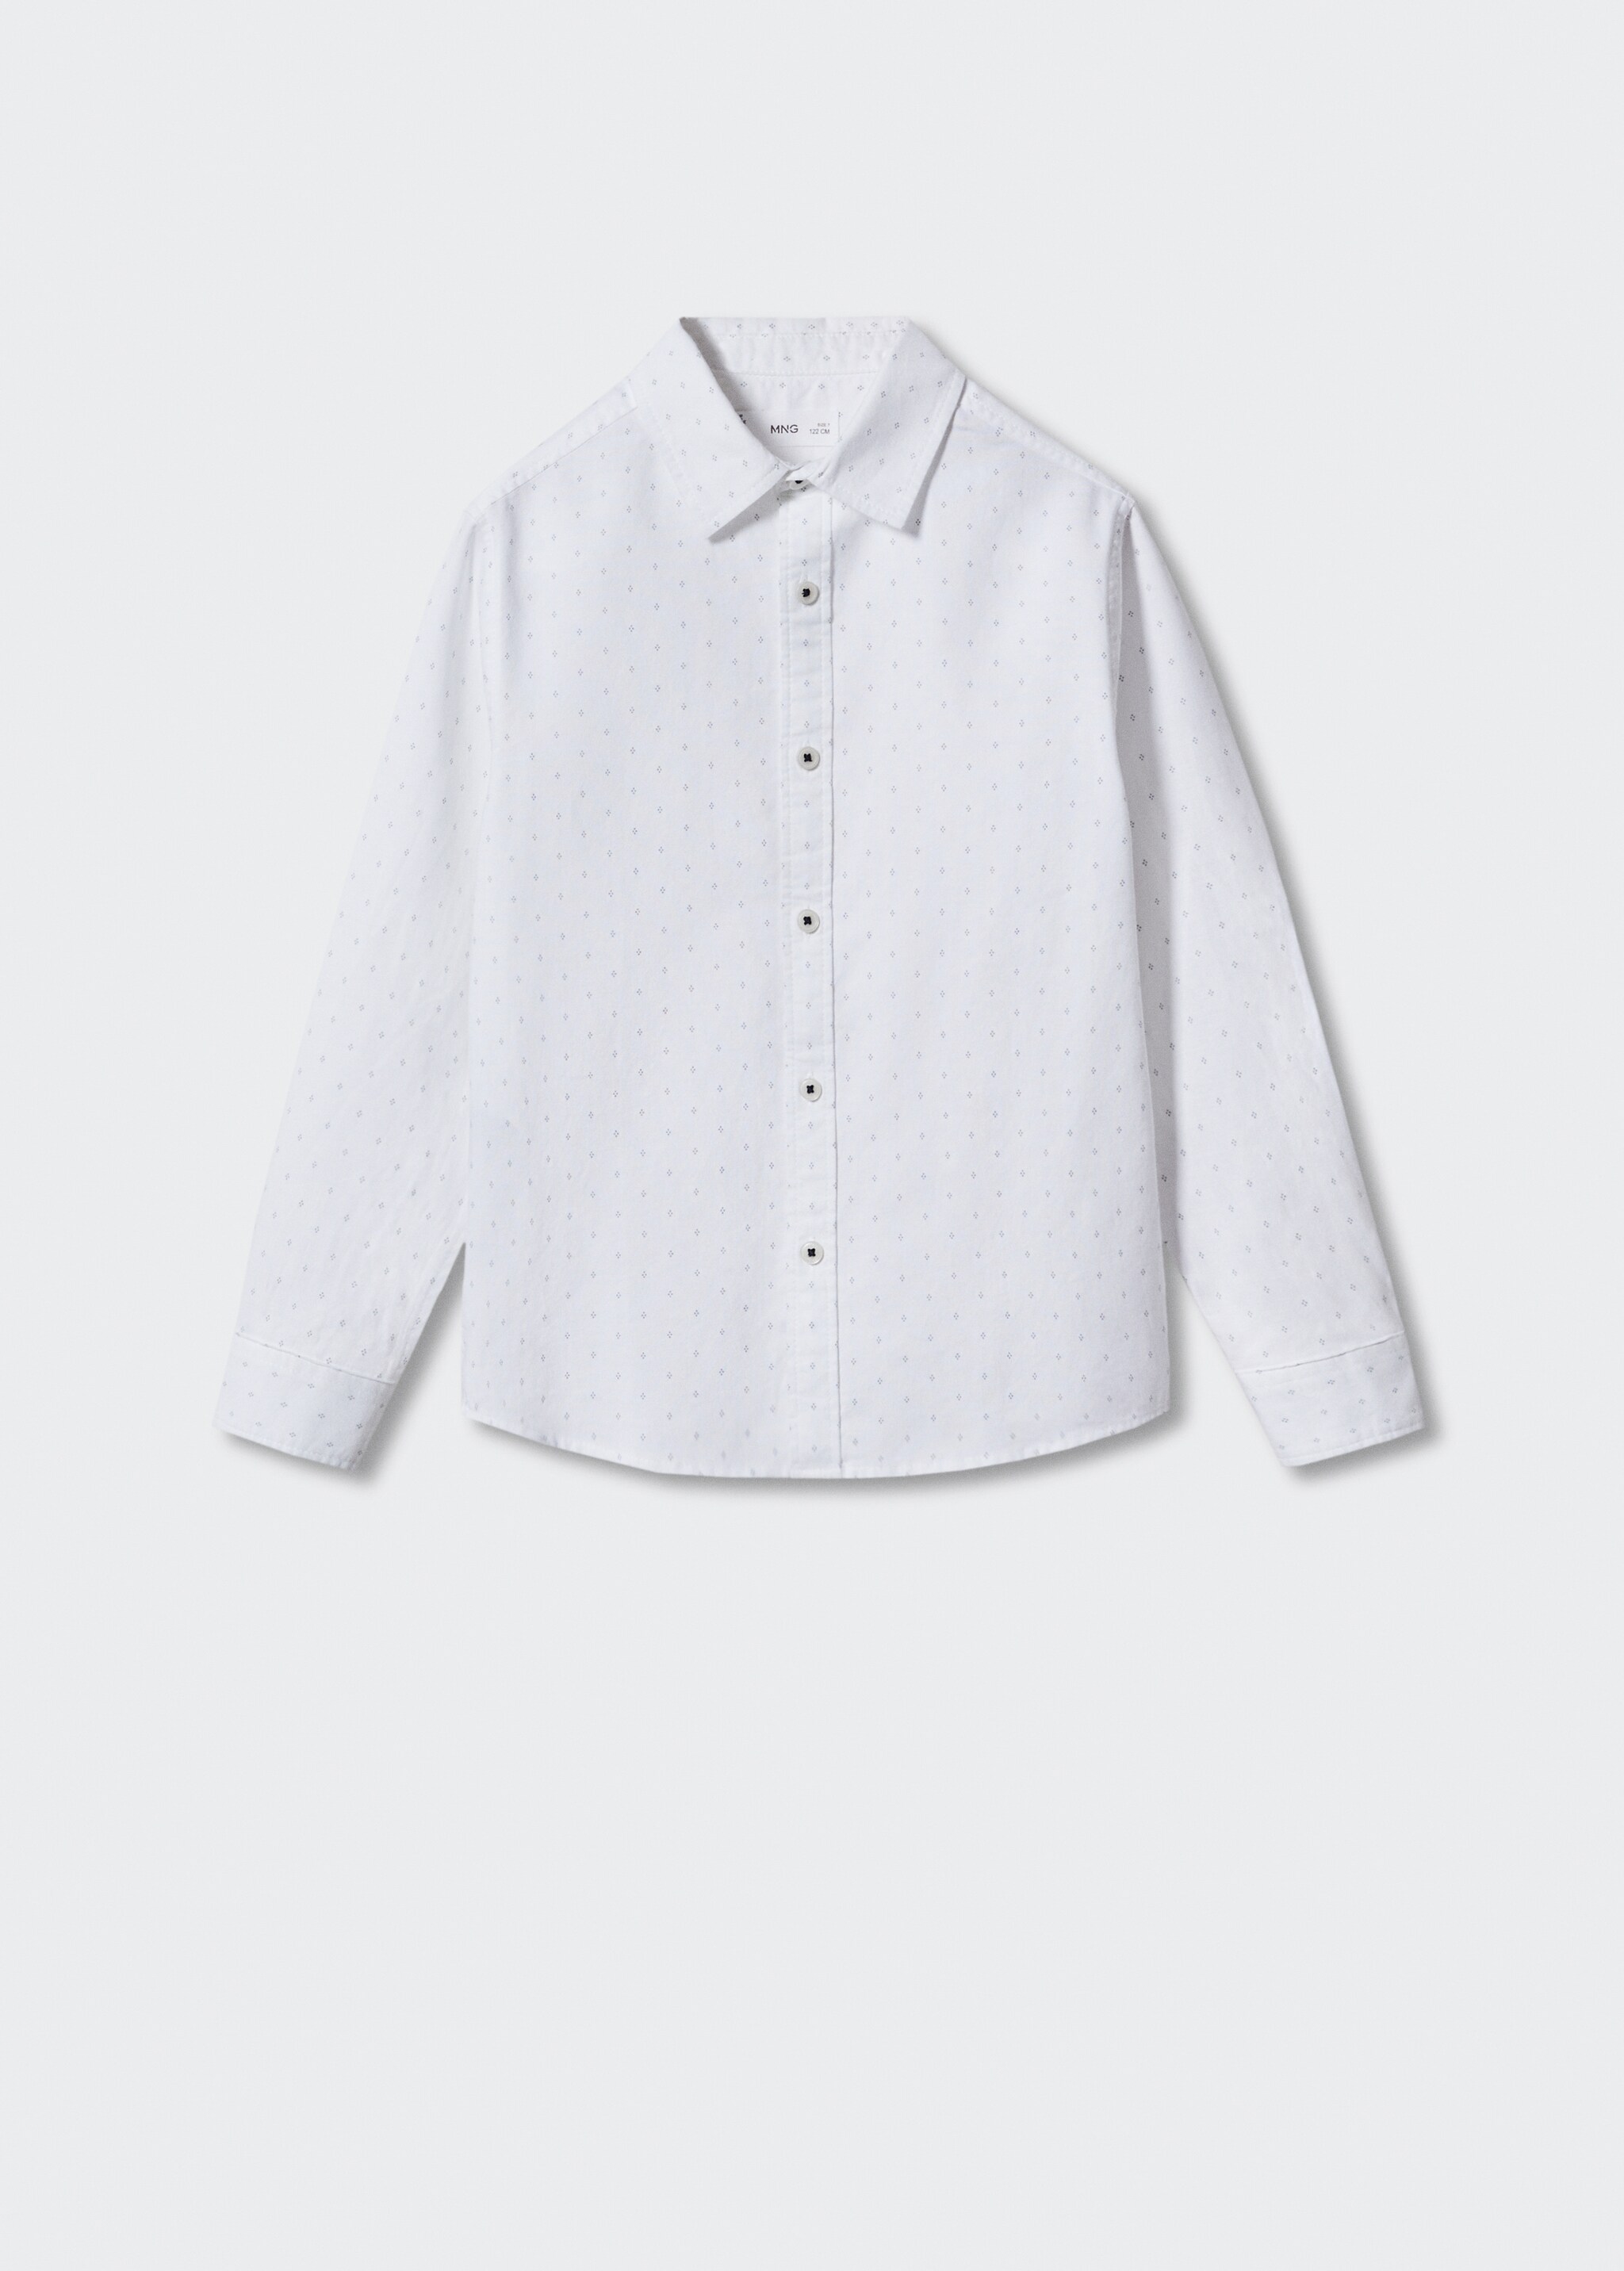 Oxford cotton shirt - Article without model